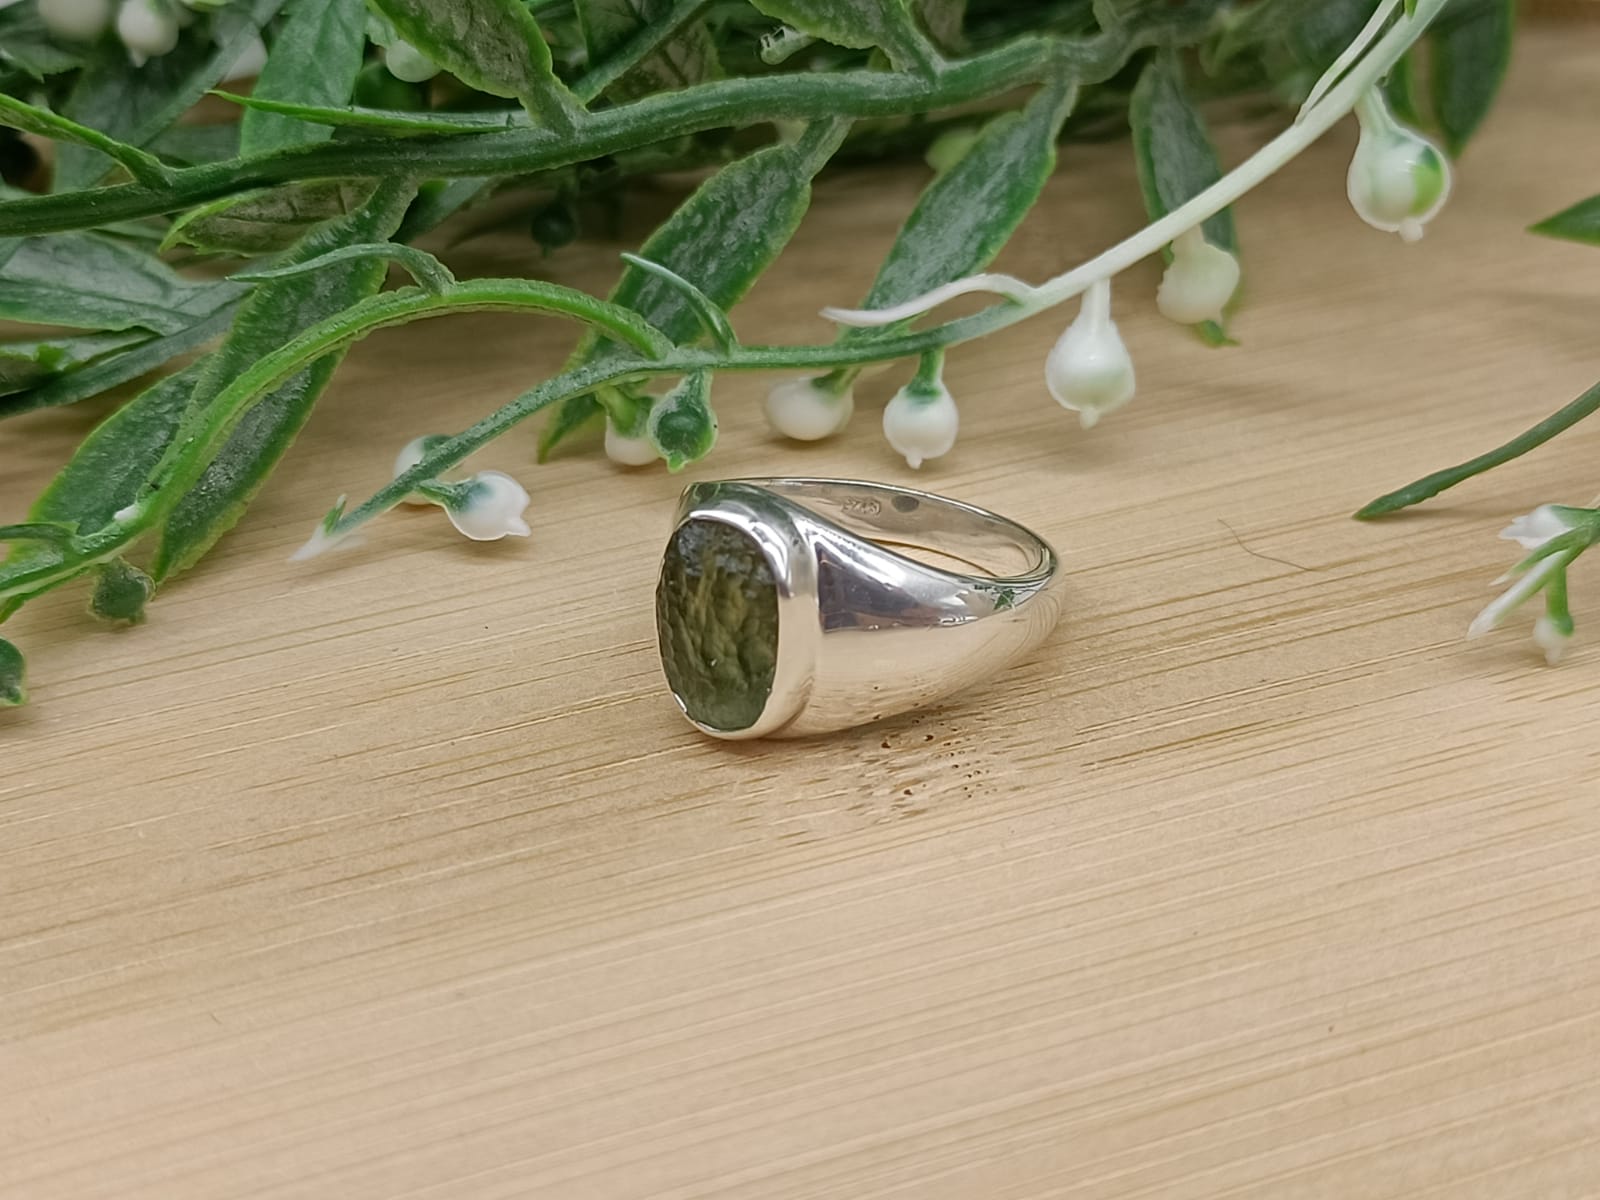 Authentic Moldavite Solid 925 Sterling Silver Ring Size 8 or P1/2 10x8mm Crystal Wellness